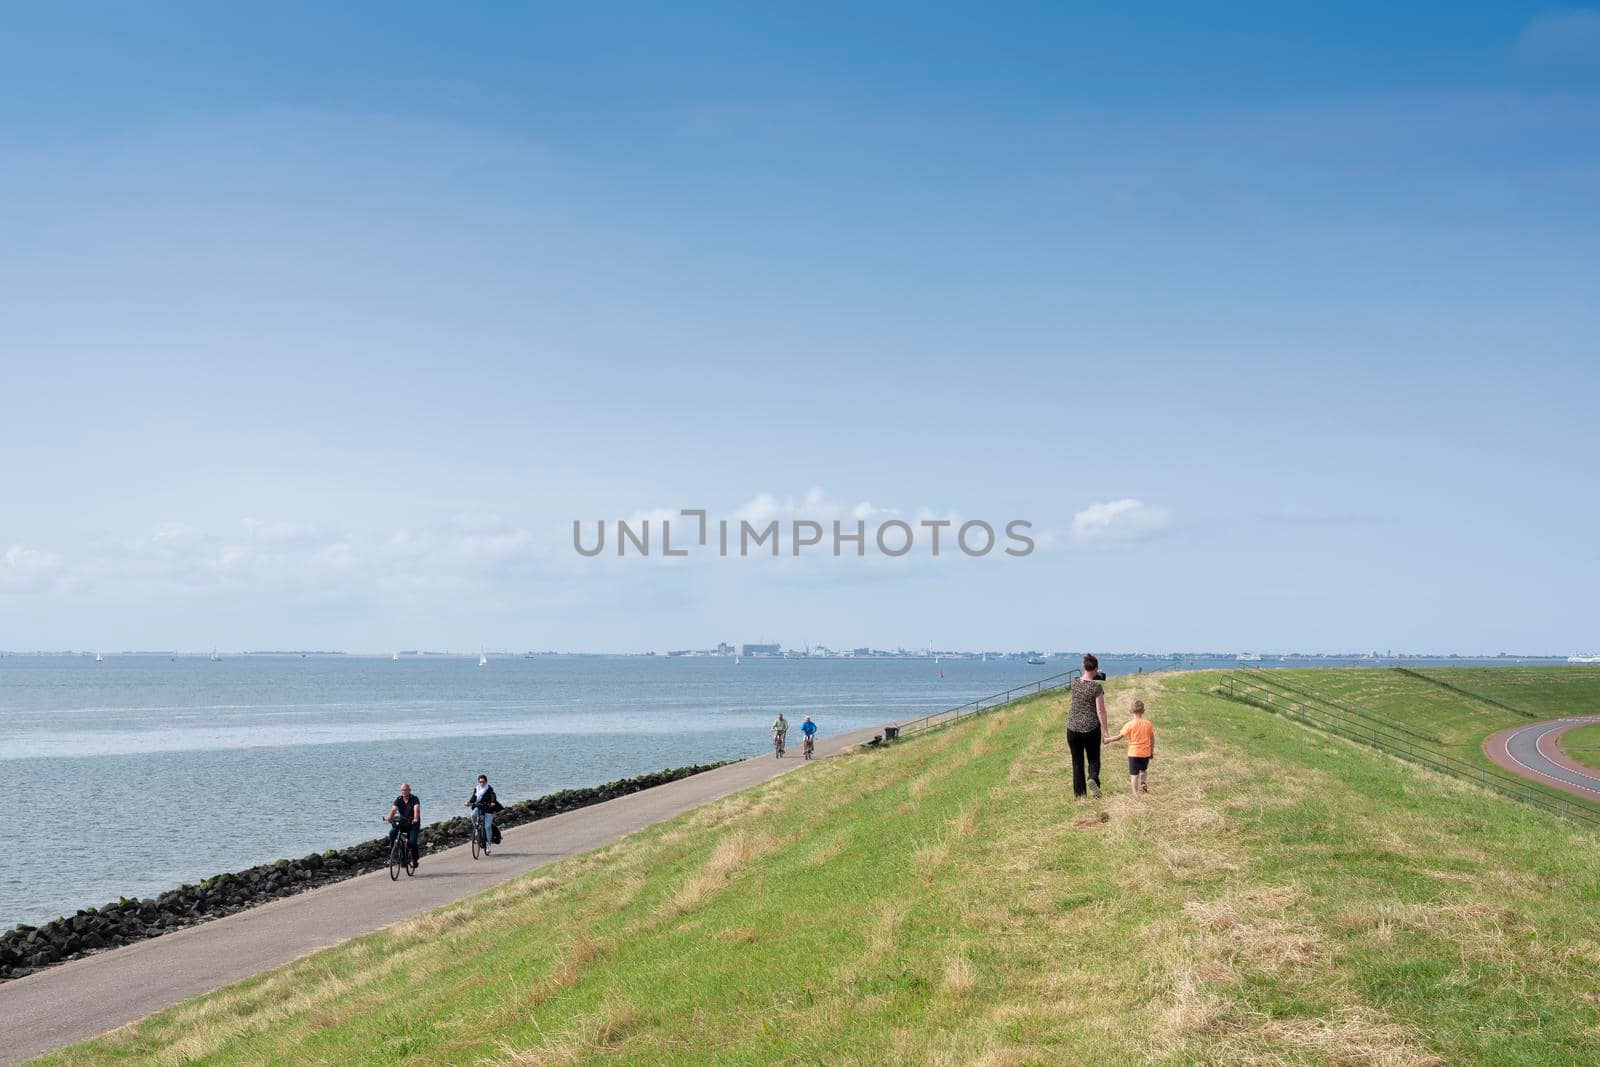 oudeschild, netherlands, 19 july 2021: people walk and ride bicycle on dike near oudeschild on the dutch island of texel under blue sky in summer in the netherlands